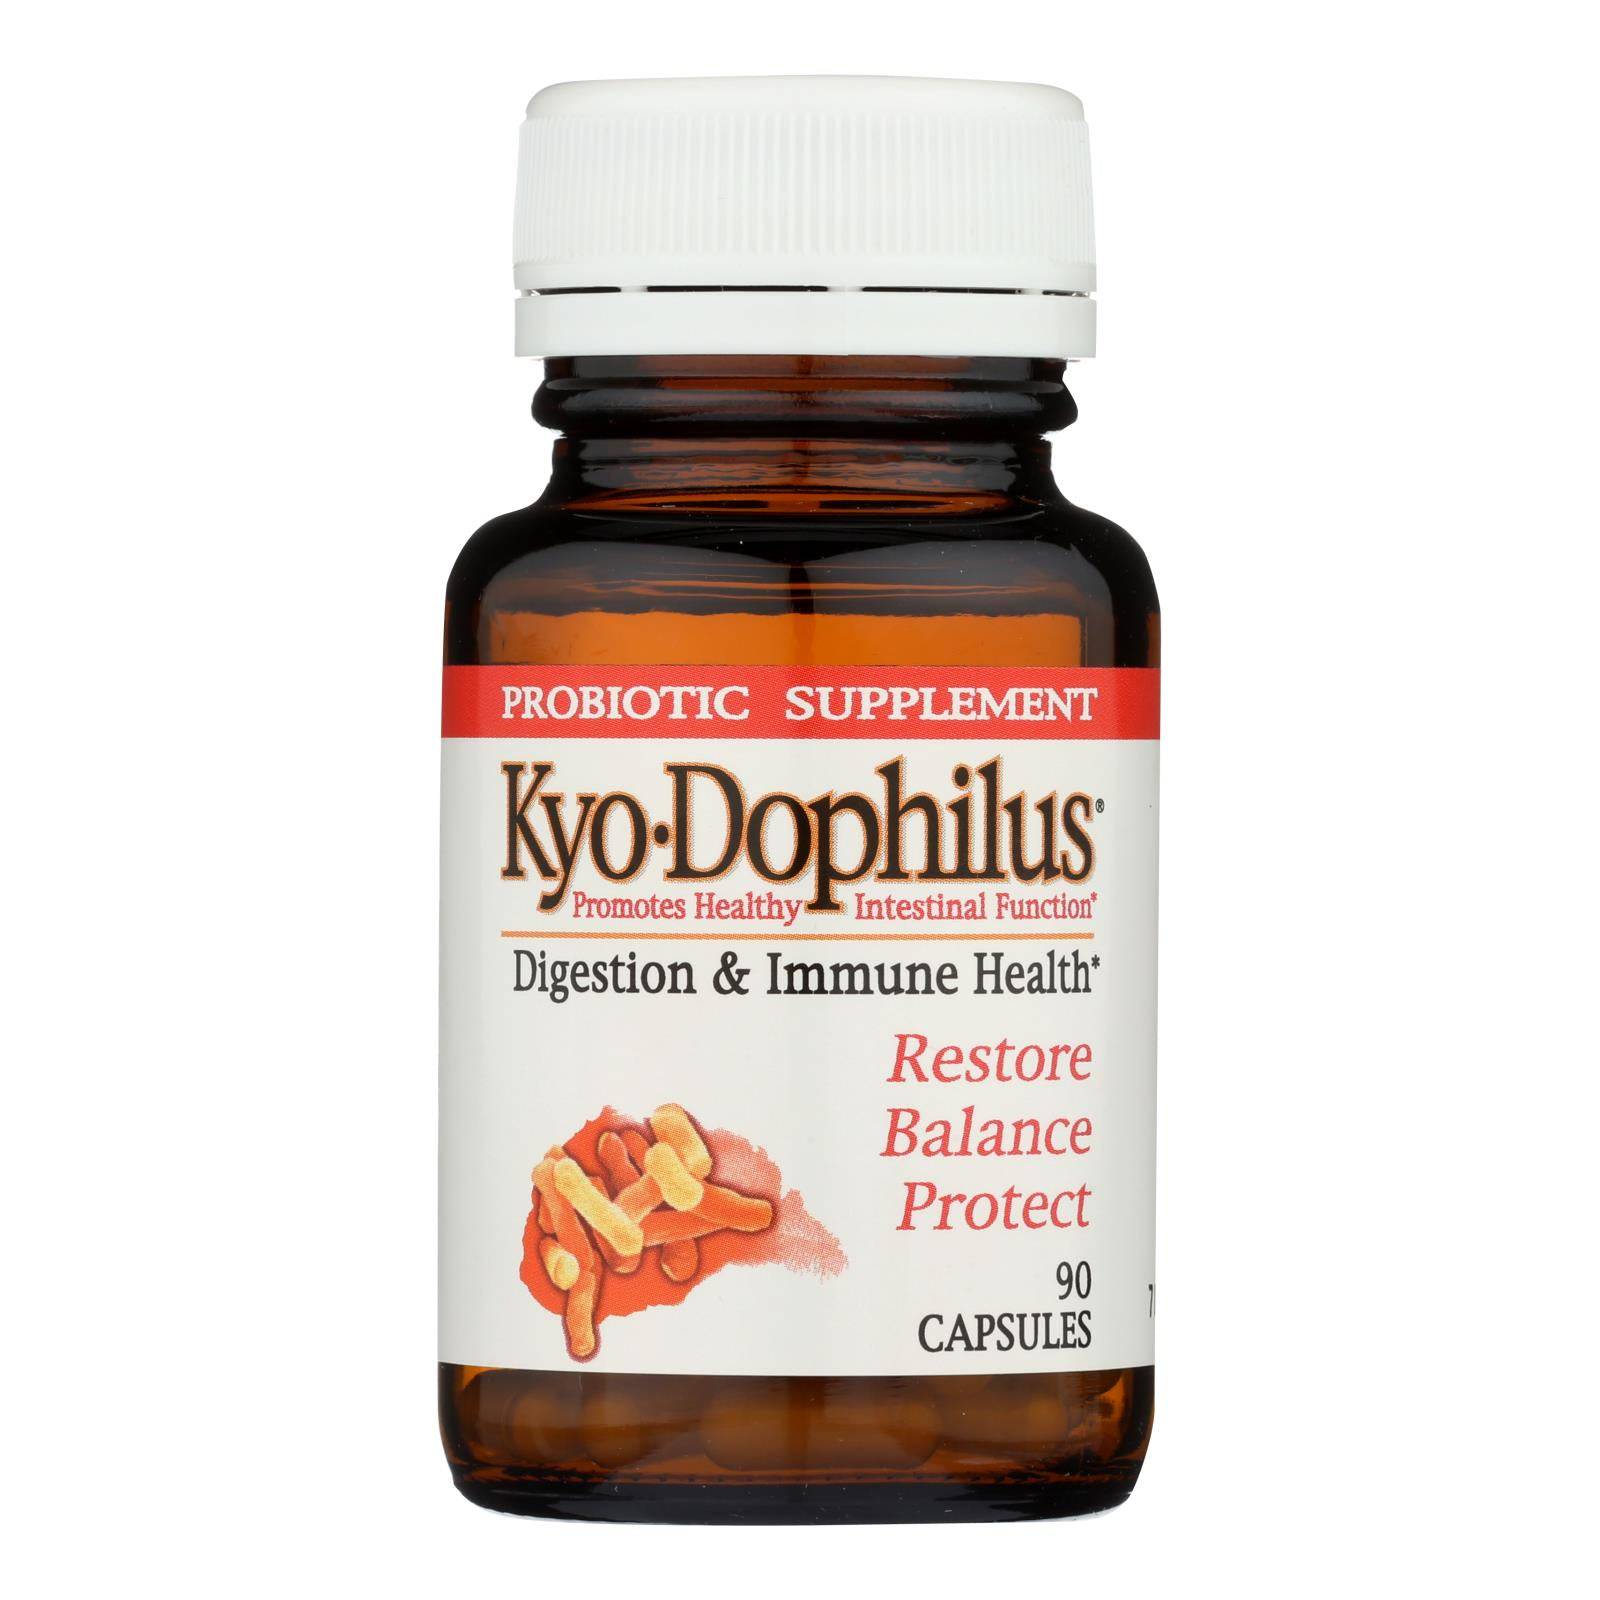 Kyolic - Kyo-dophilus Digestion And Immune Health - 90 Capsules | OnlyNaturals.us